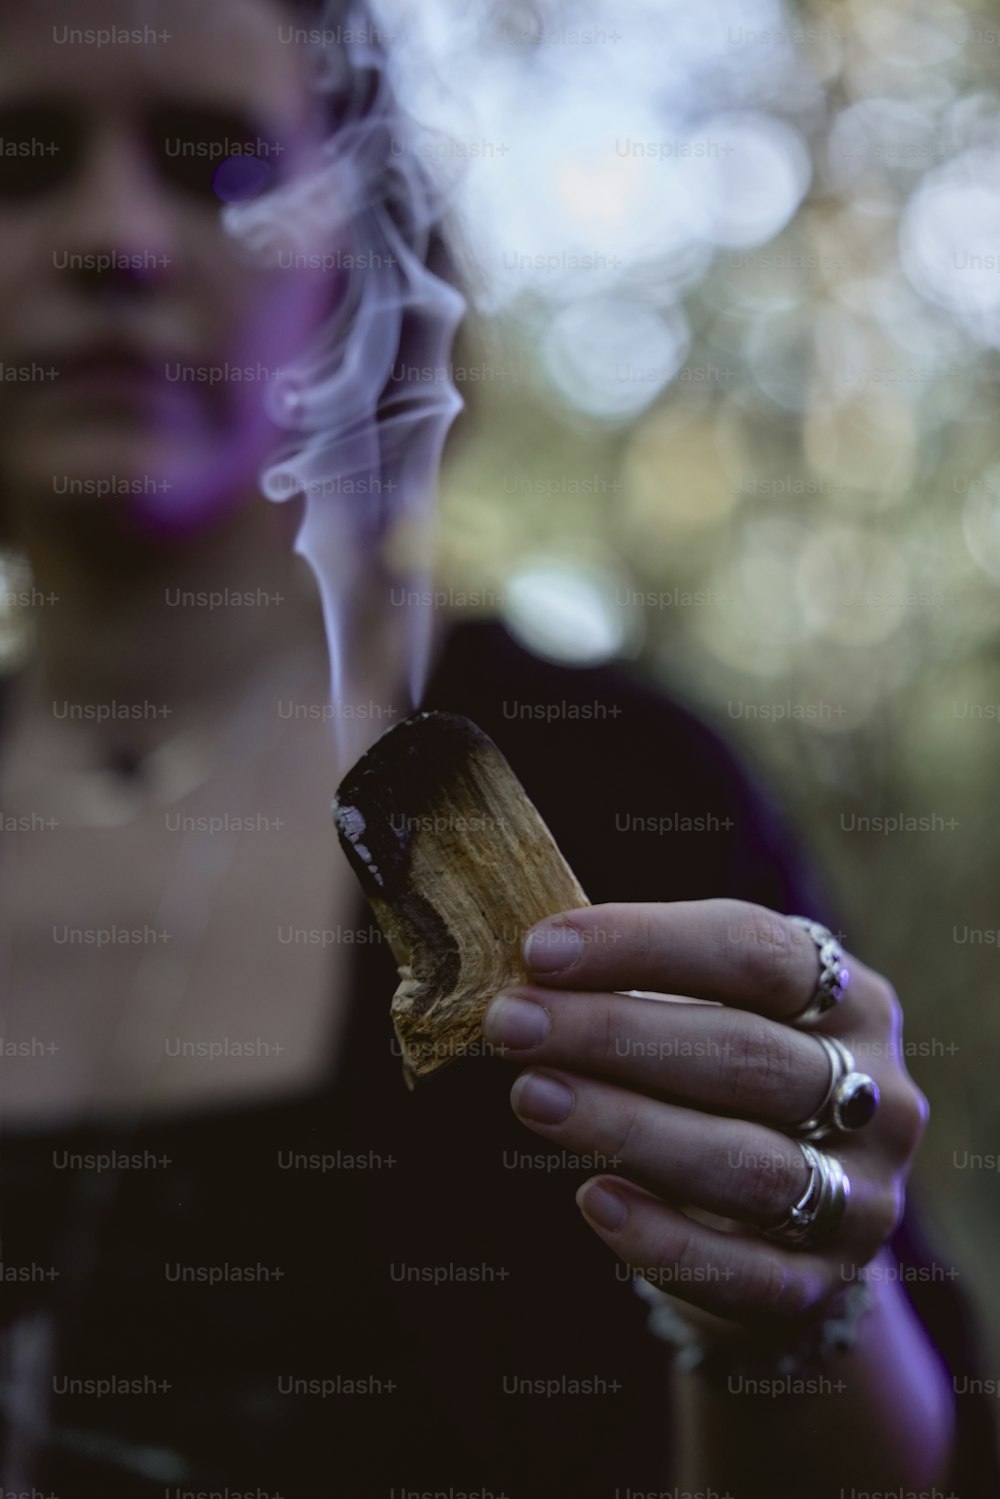 a woman holding a cigarette in her hand